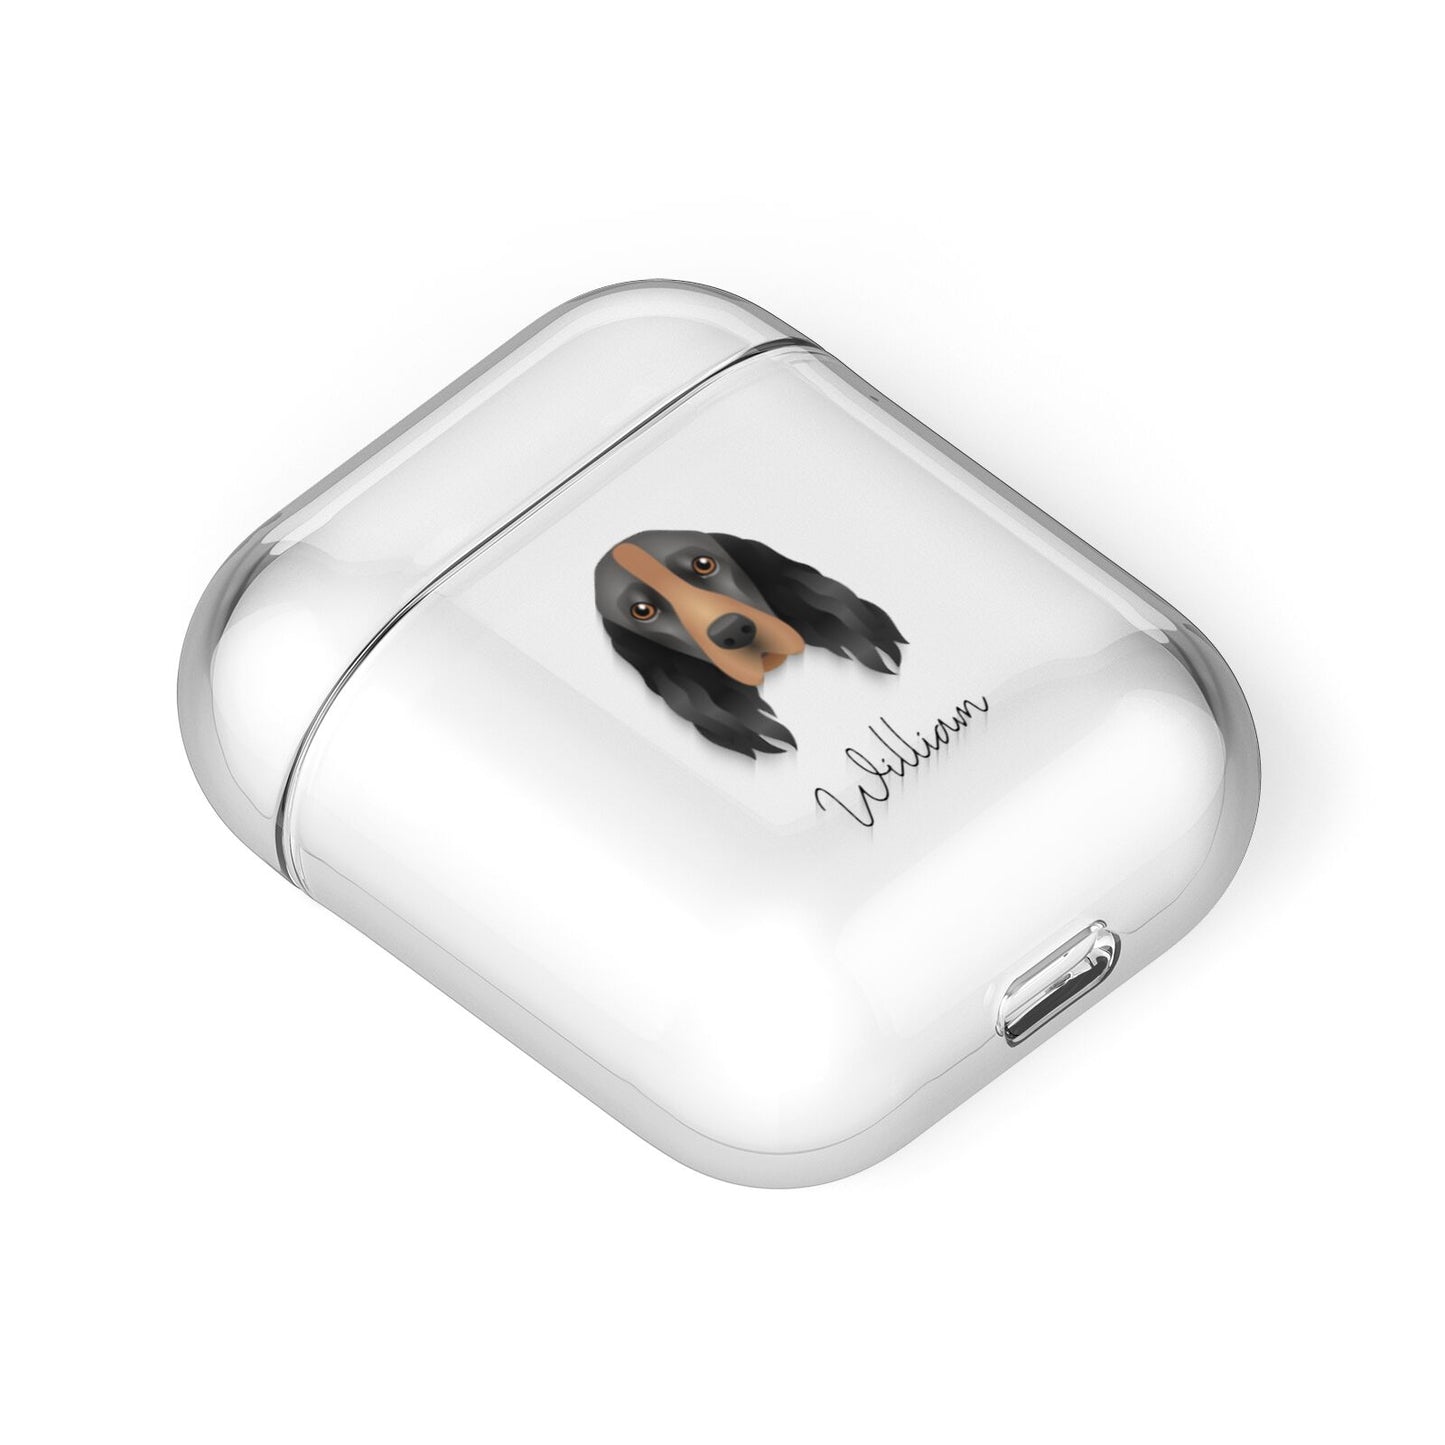 Field Spaniel Personalised AirPods Case Laid Flat